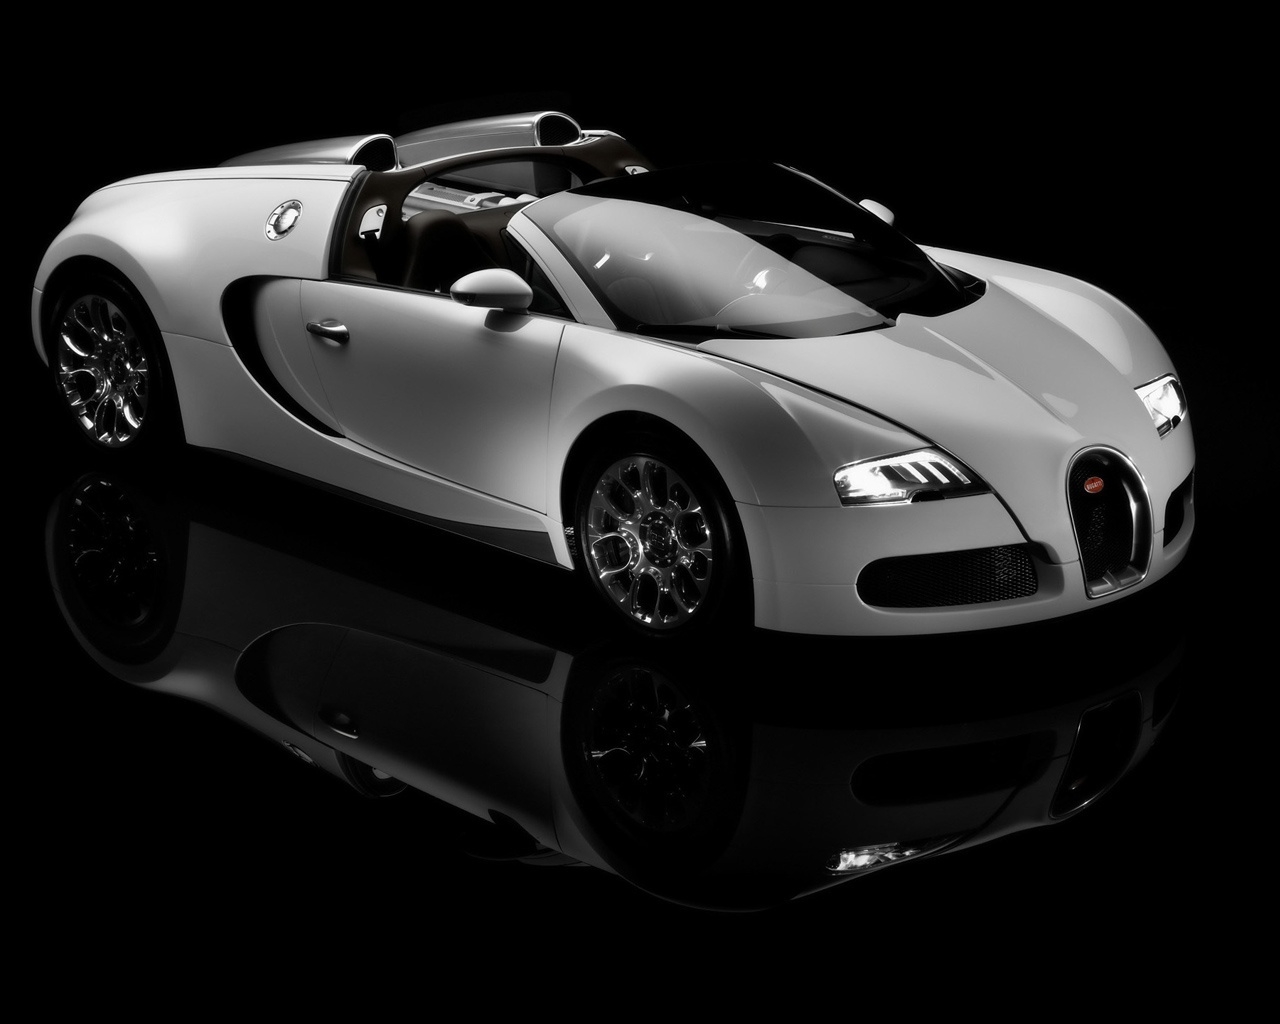 Bugatti Veyron 16.4 Grand Sport Production 2009 - Studio Front And Side for 1280 x 1024 resolution